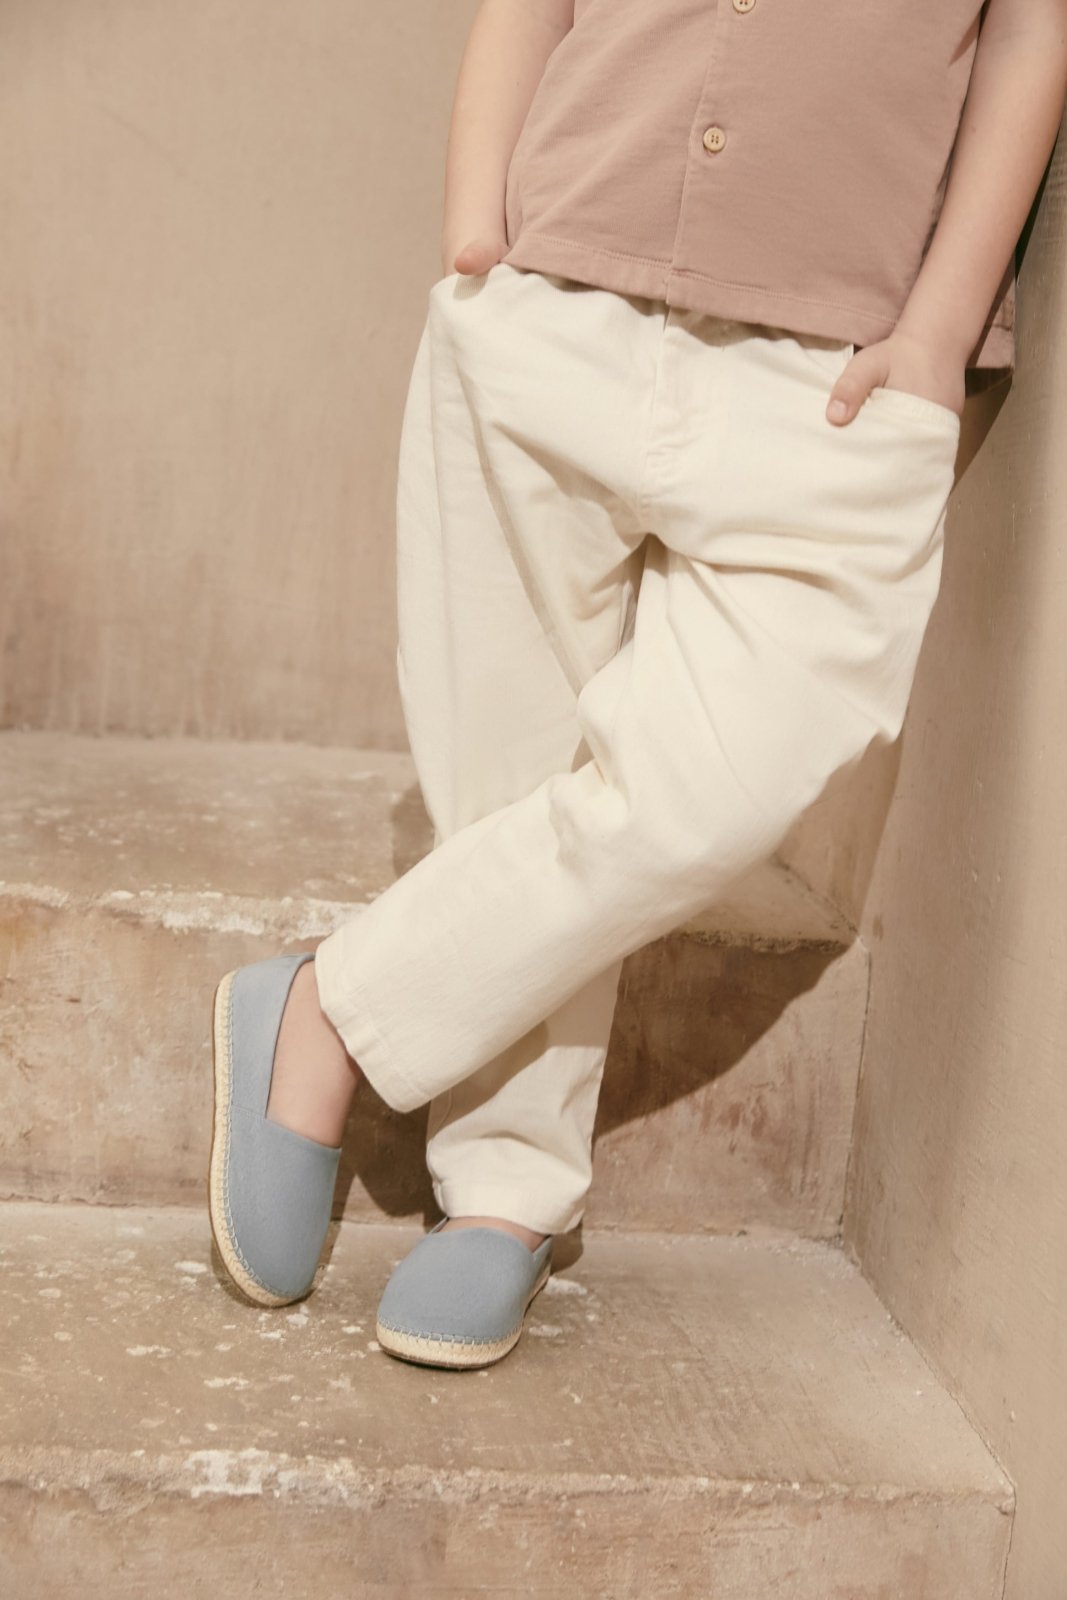 Marcus Suede Blue Loafers by Age of Innocence